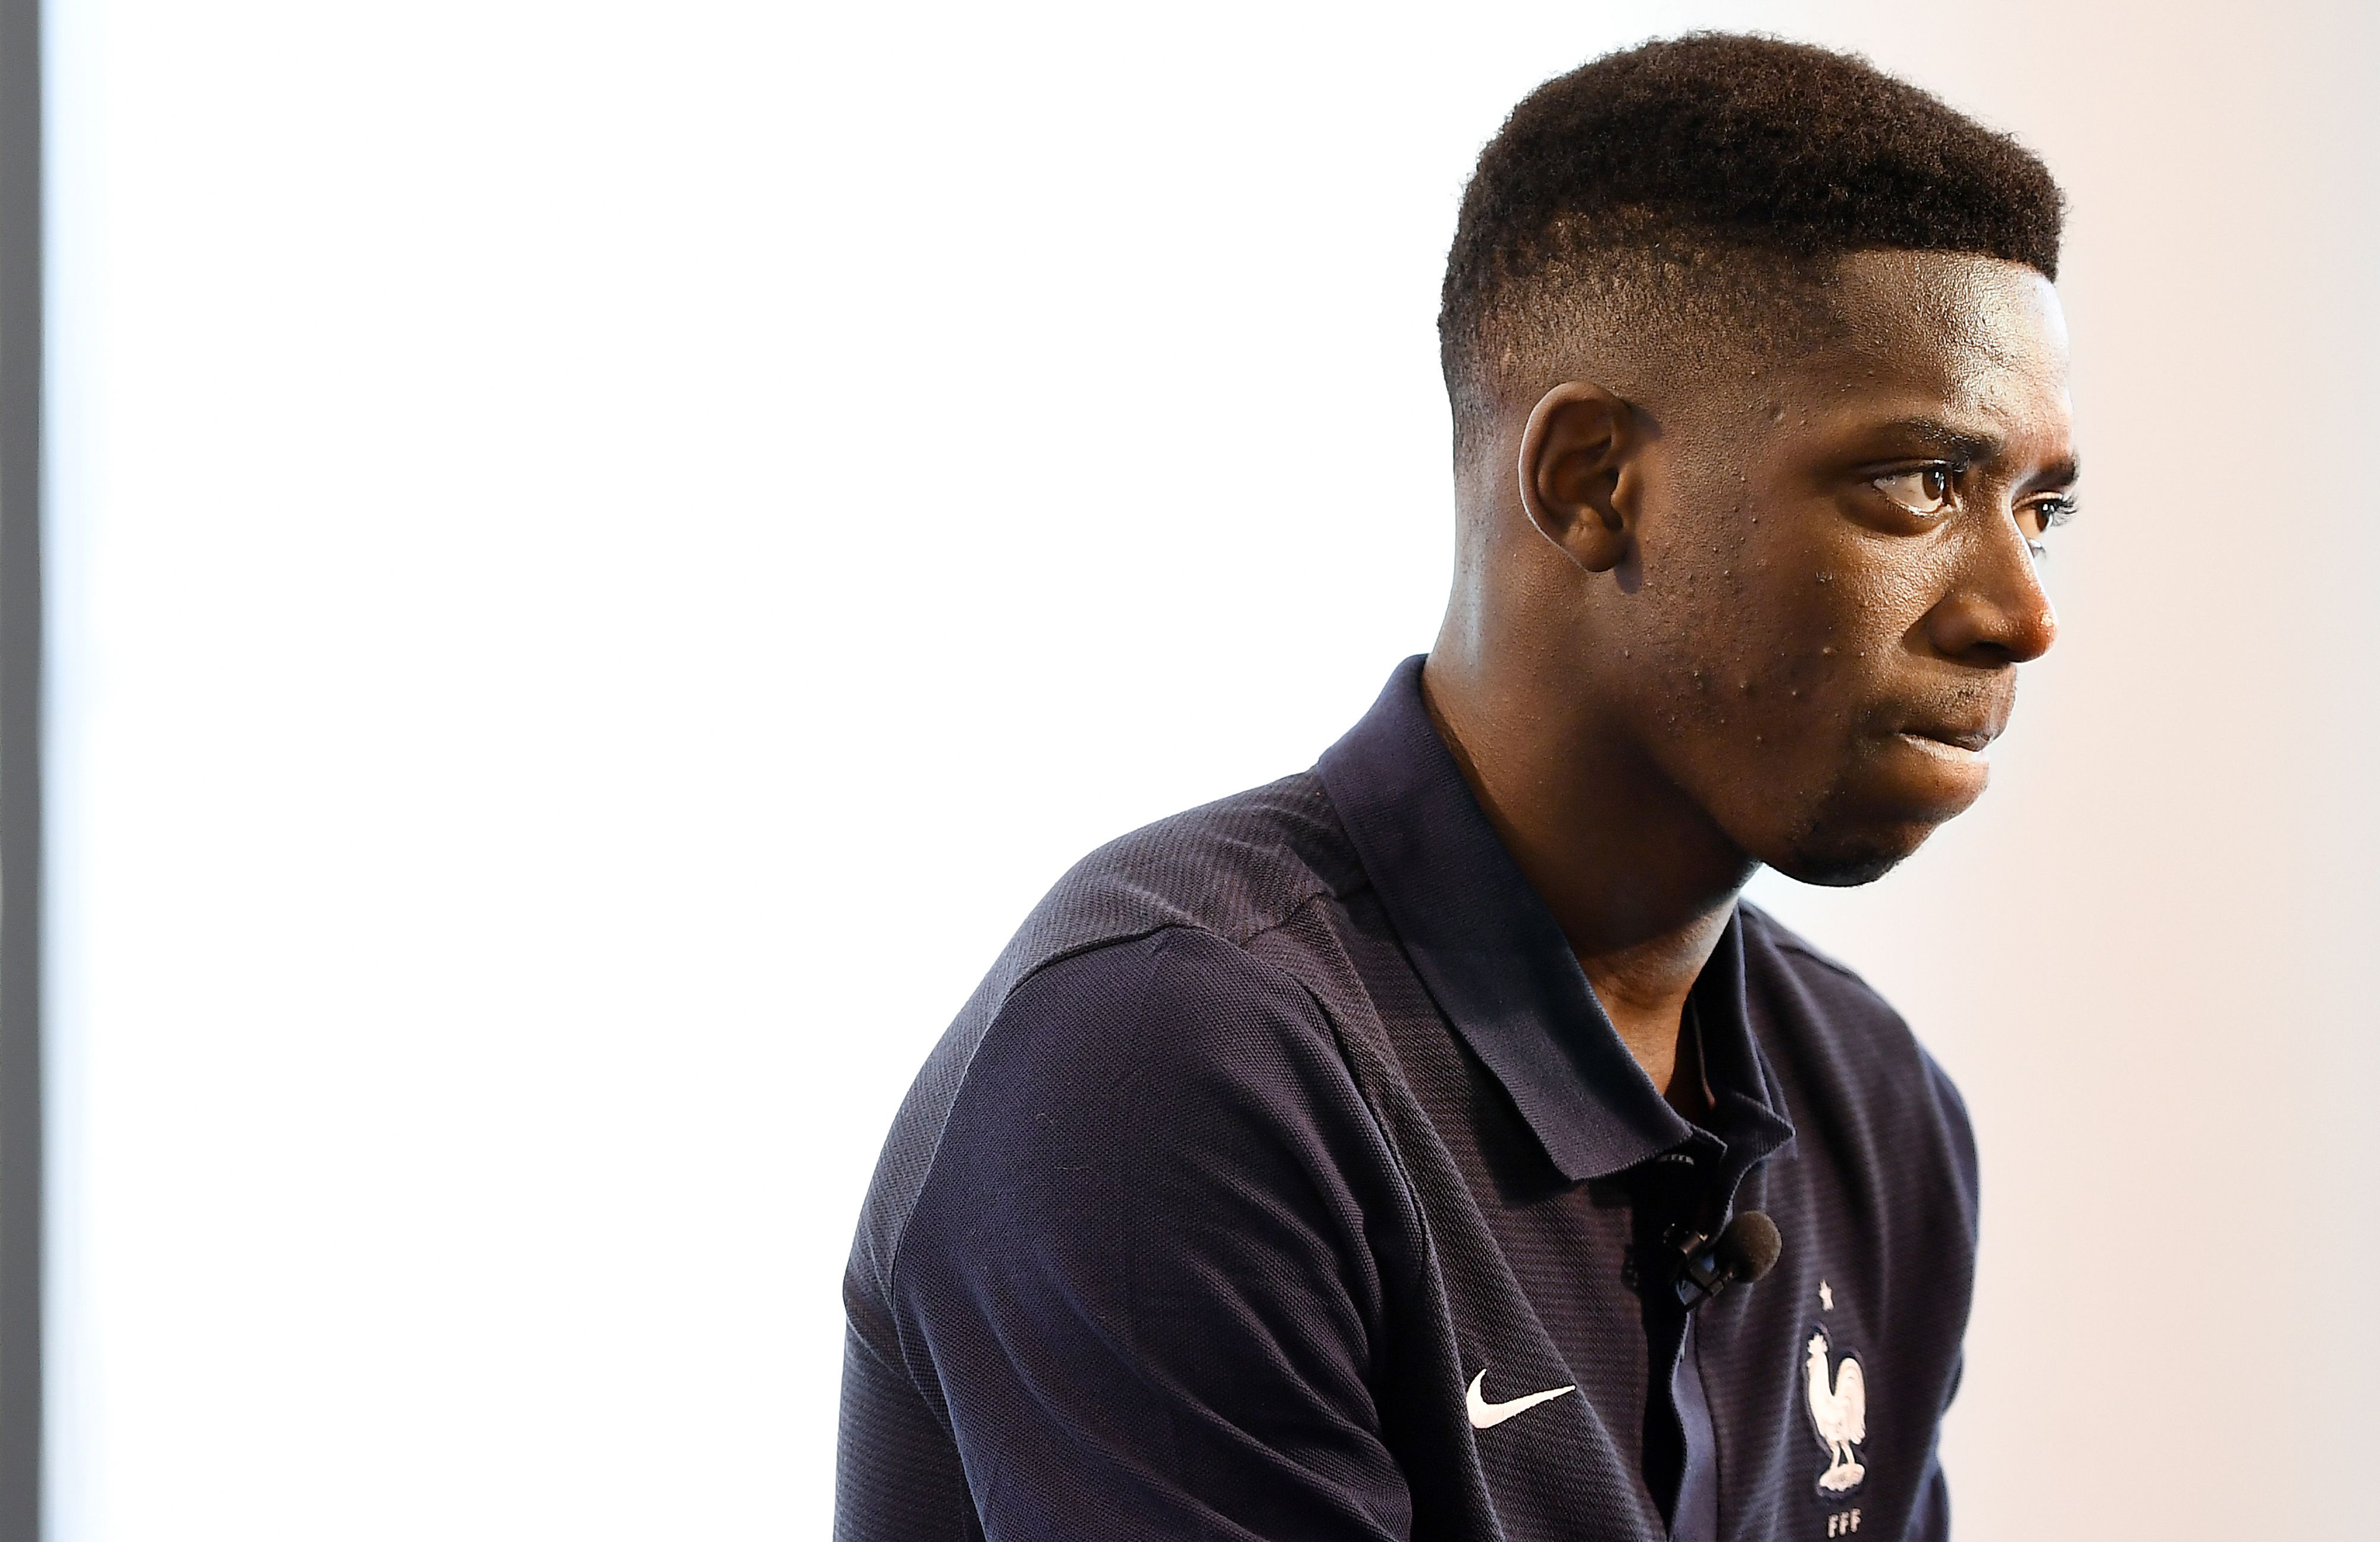 France's forward Ousmane Dembele reacts during a press conference in Clairefontaine en Yvelines on June 5, 2017 as part of the team preparation for the upcoming World Cup 2018 qualifier football match against Sweden on June 9.  / AFP PHOTO / FRANCK FIFE        (Photo credit should read FRANCK FIFE/AFP/Getty Images)